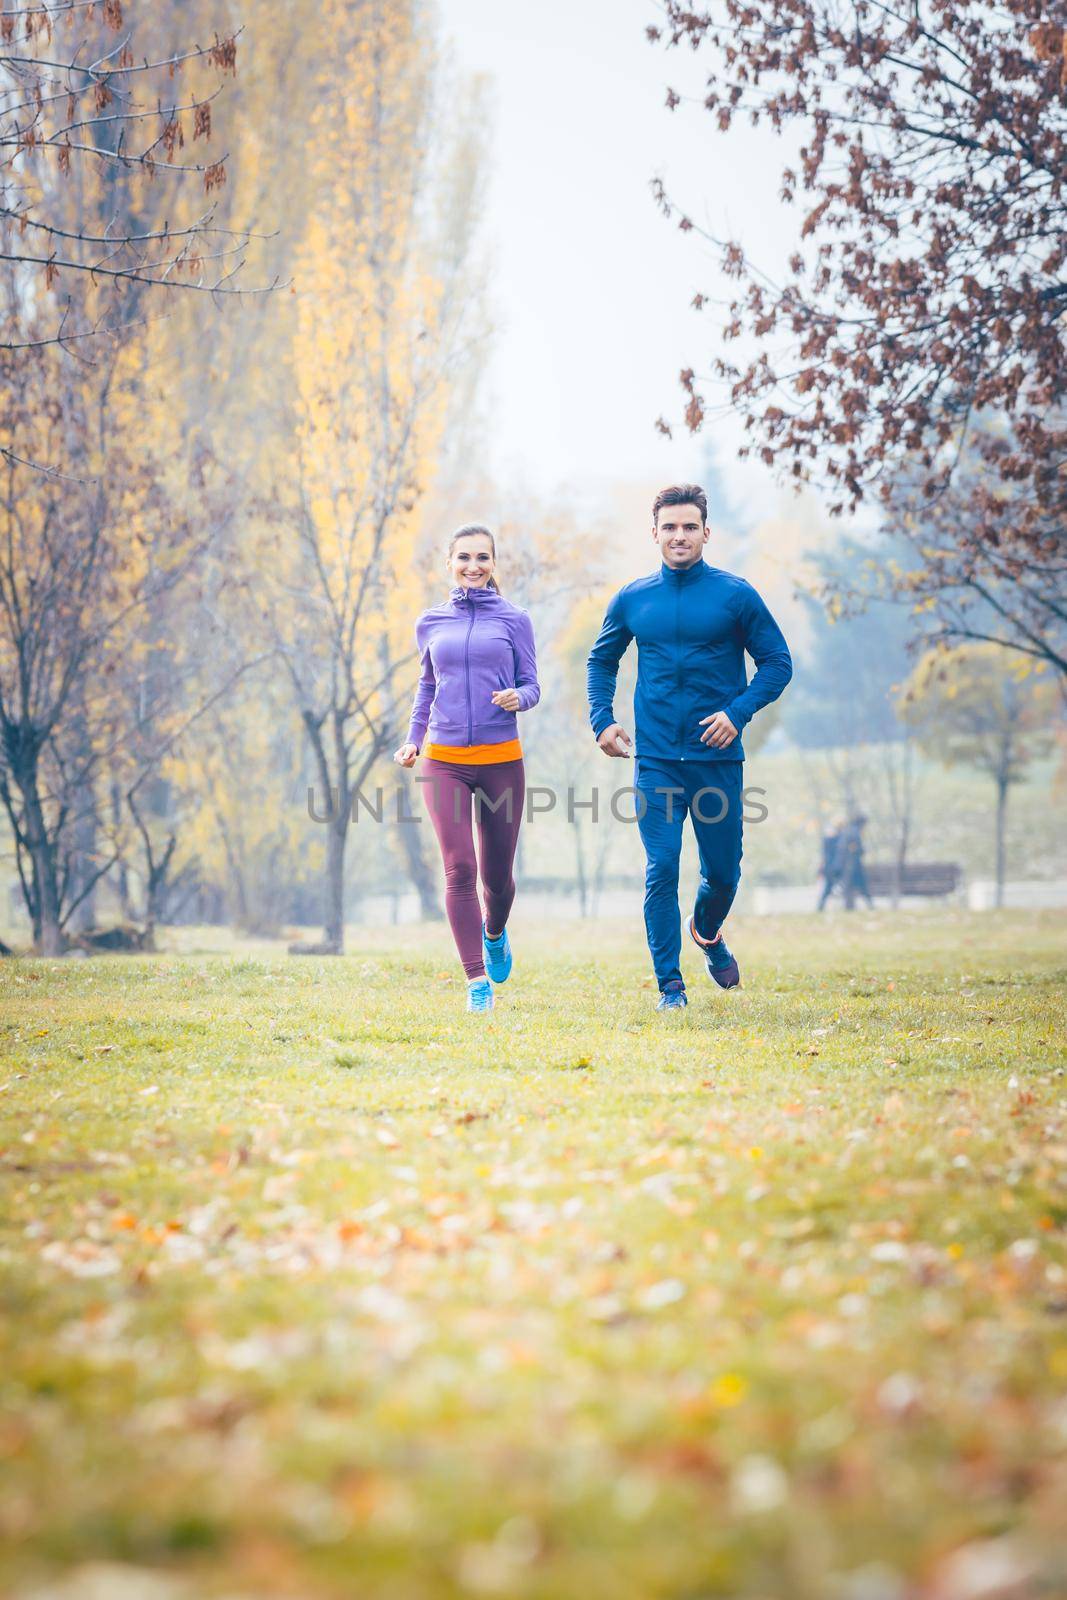 Woman and man running on a path in autumn park for sport